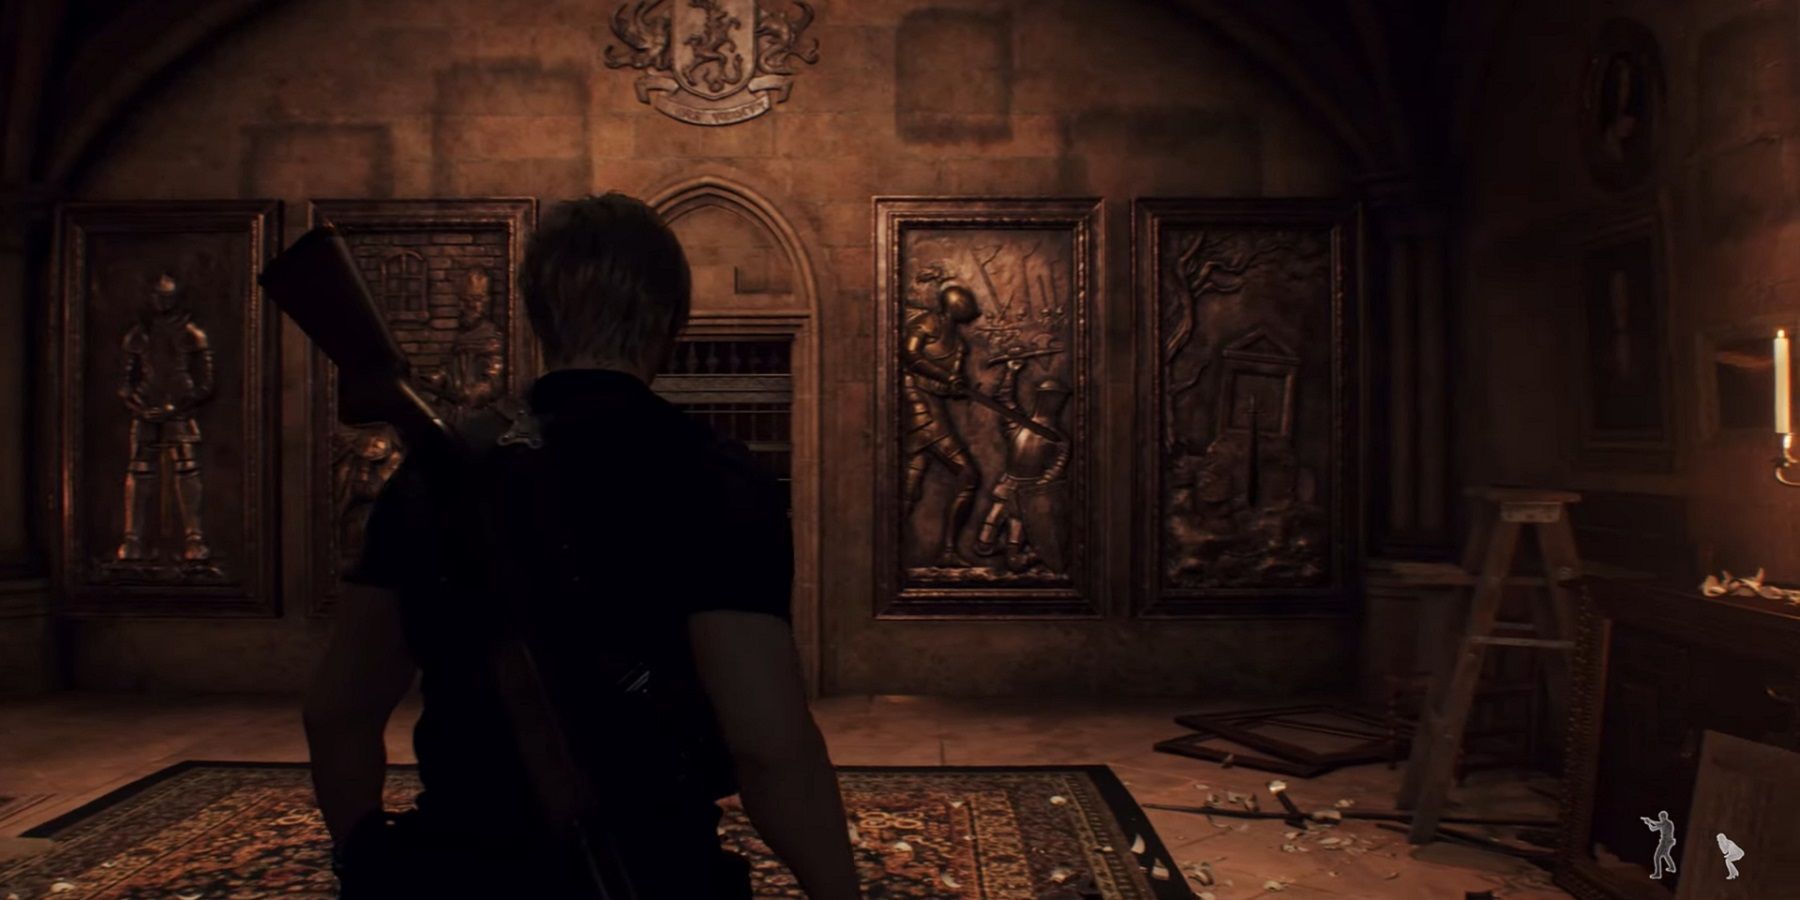 The Four Swords puzzle from Resident Evil 4.